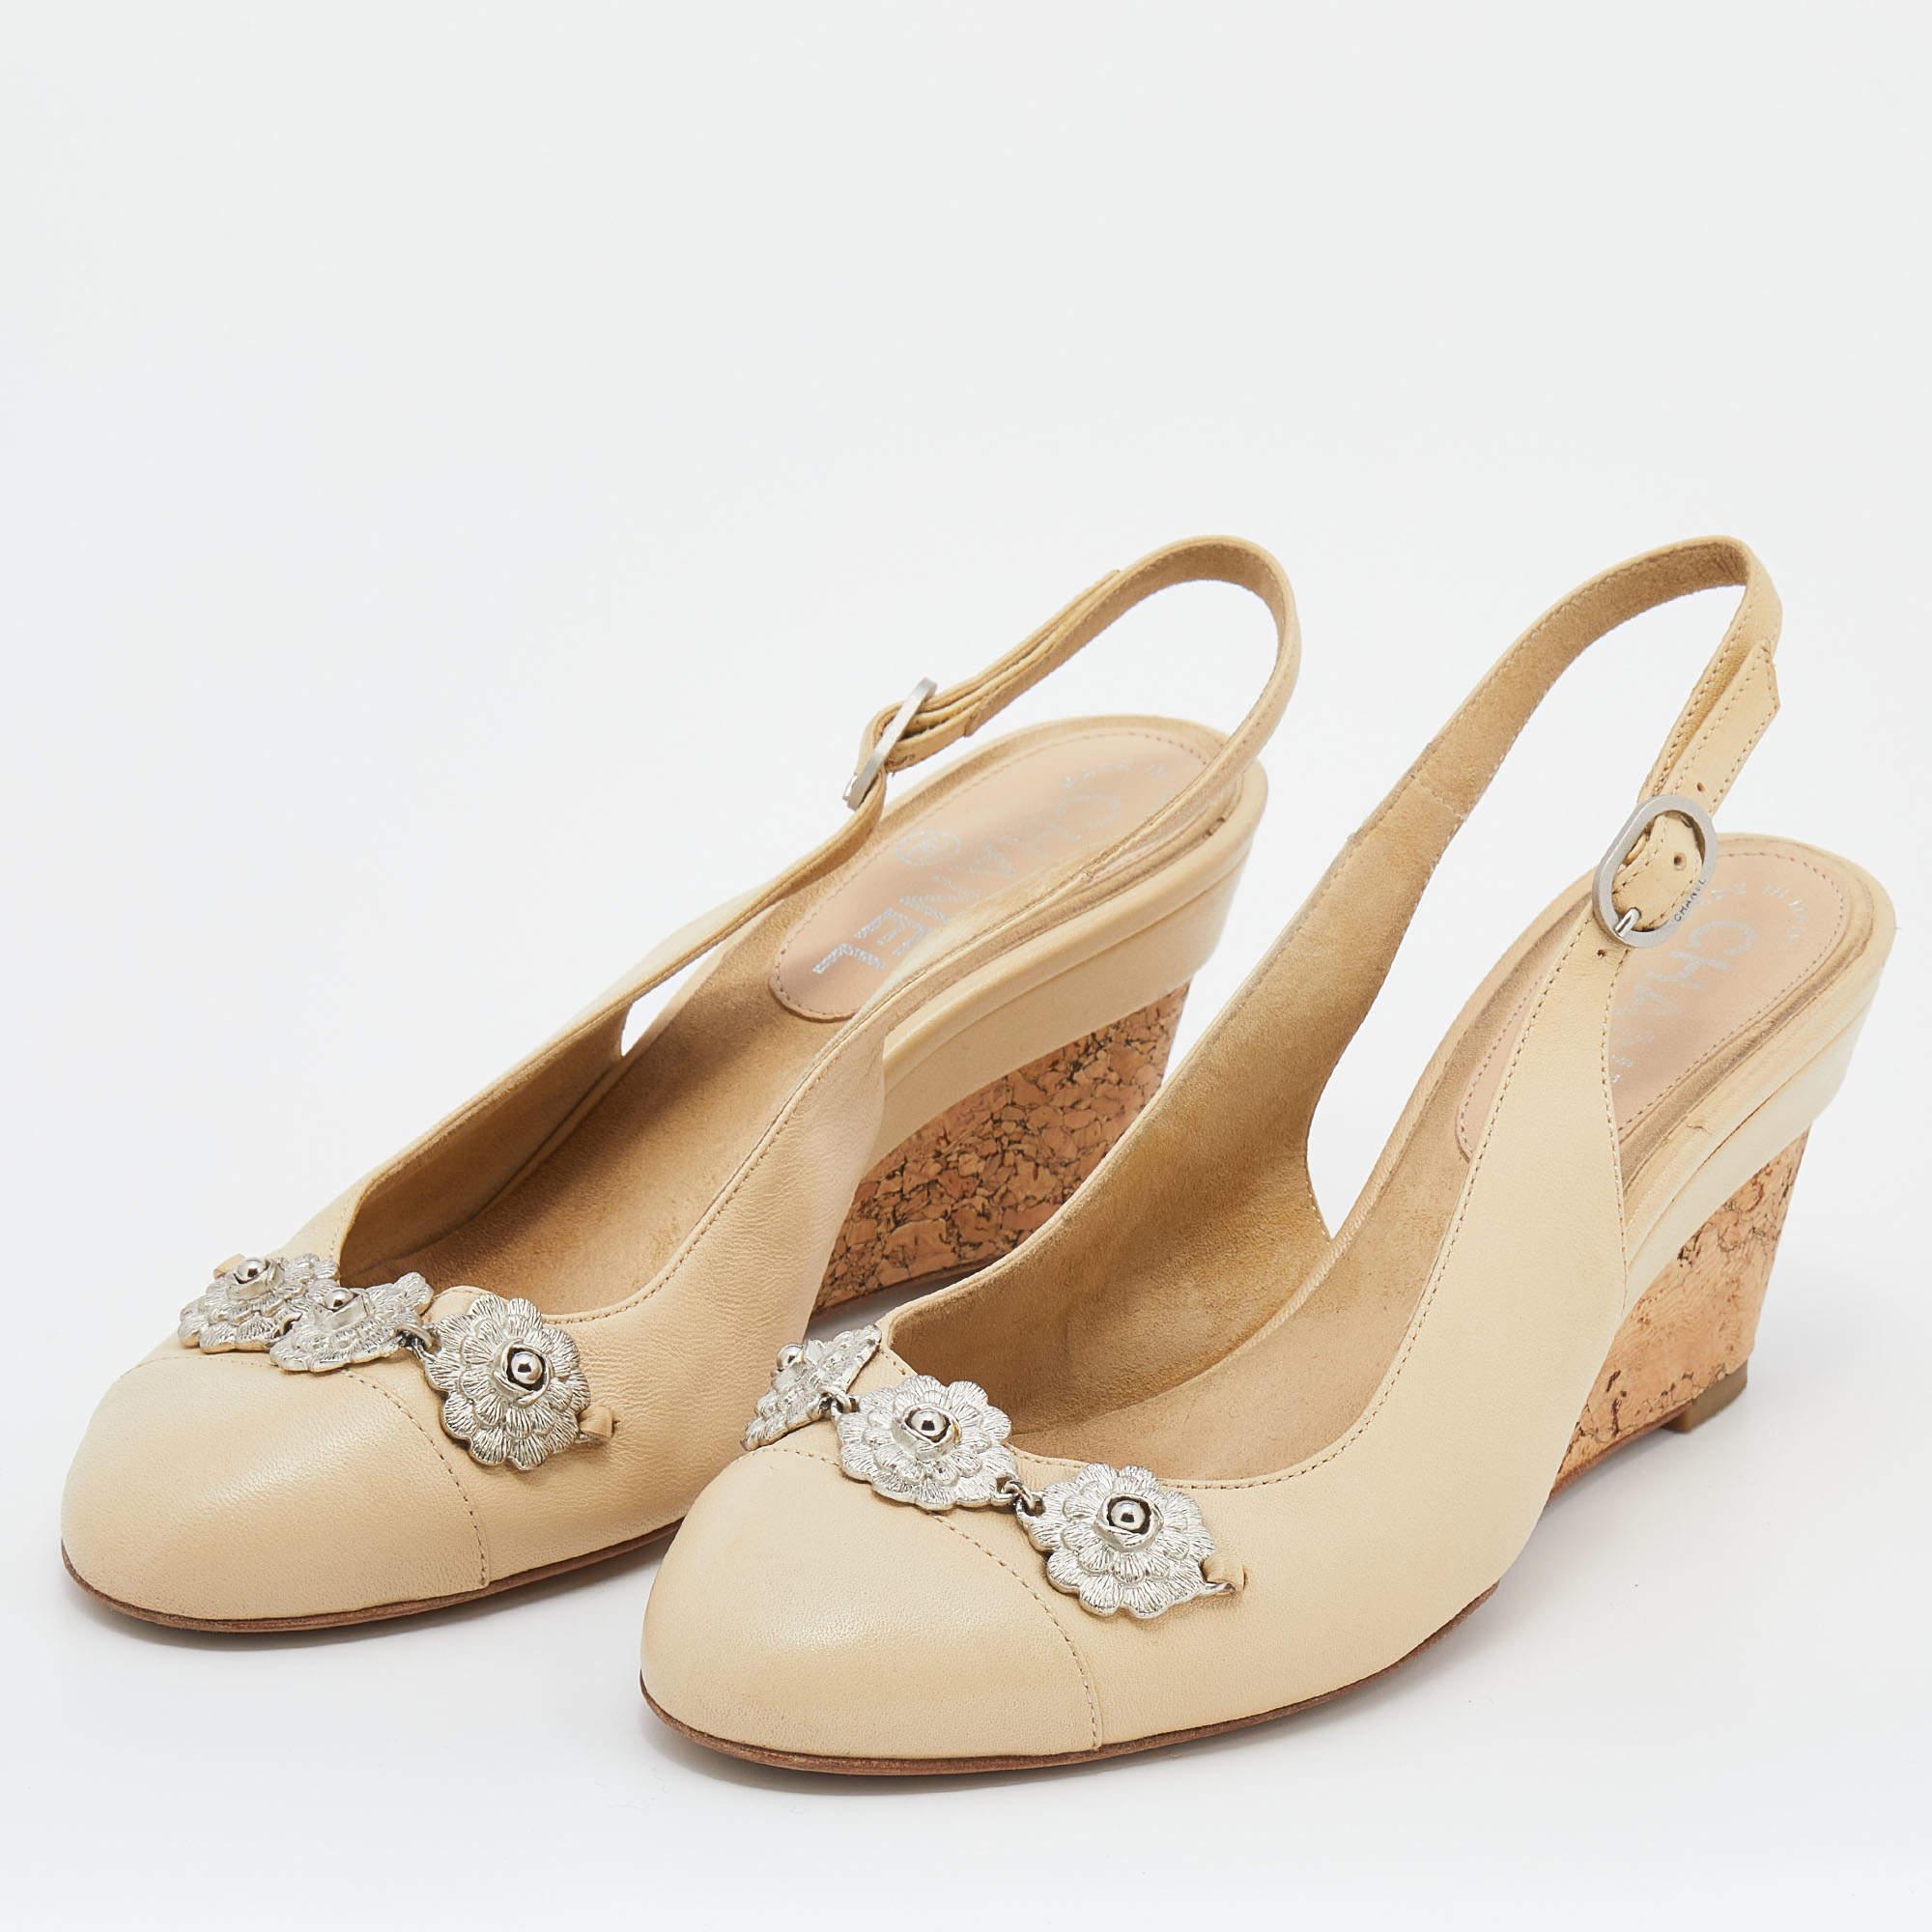 This timeless pair of sandals from Chanel looks even better on the feet. The shoes have an elegant design made from cream leather, with flower-detailed round toes, wedge heels, and buckle slingbacks added for a sleek finish.

